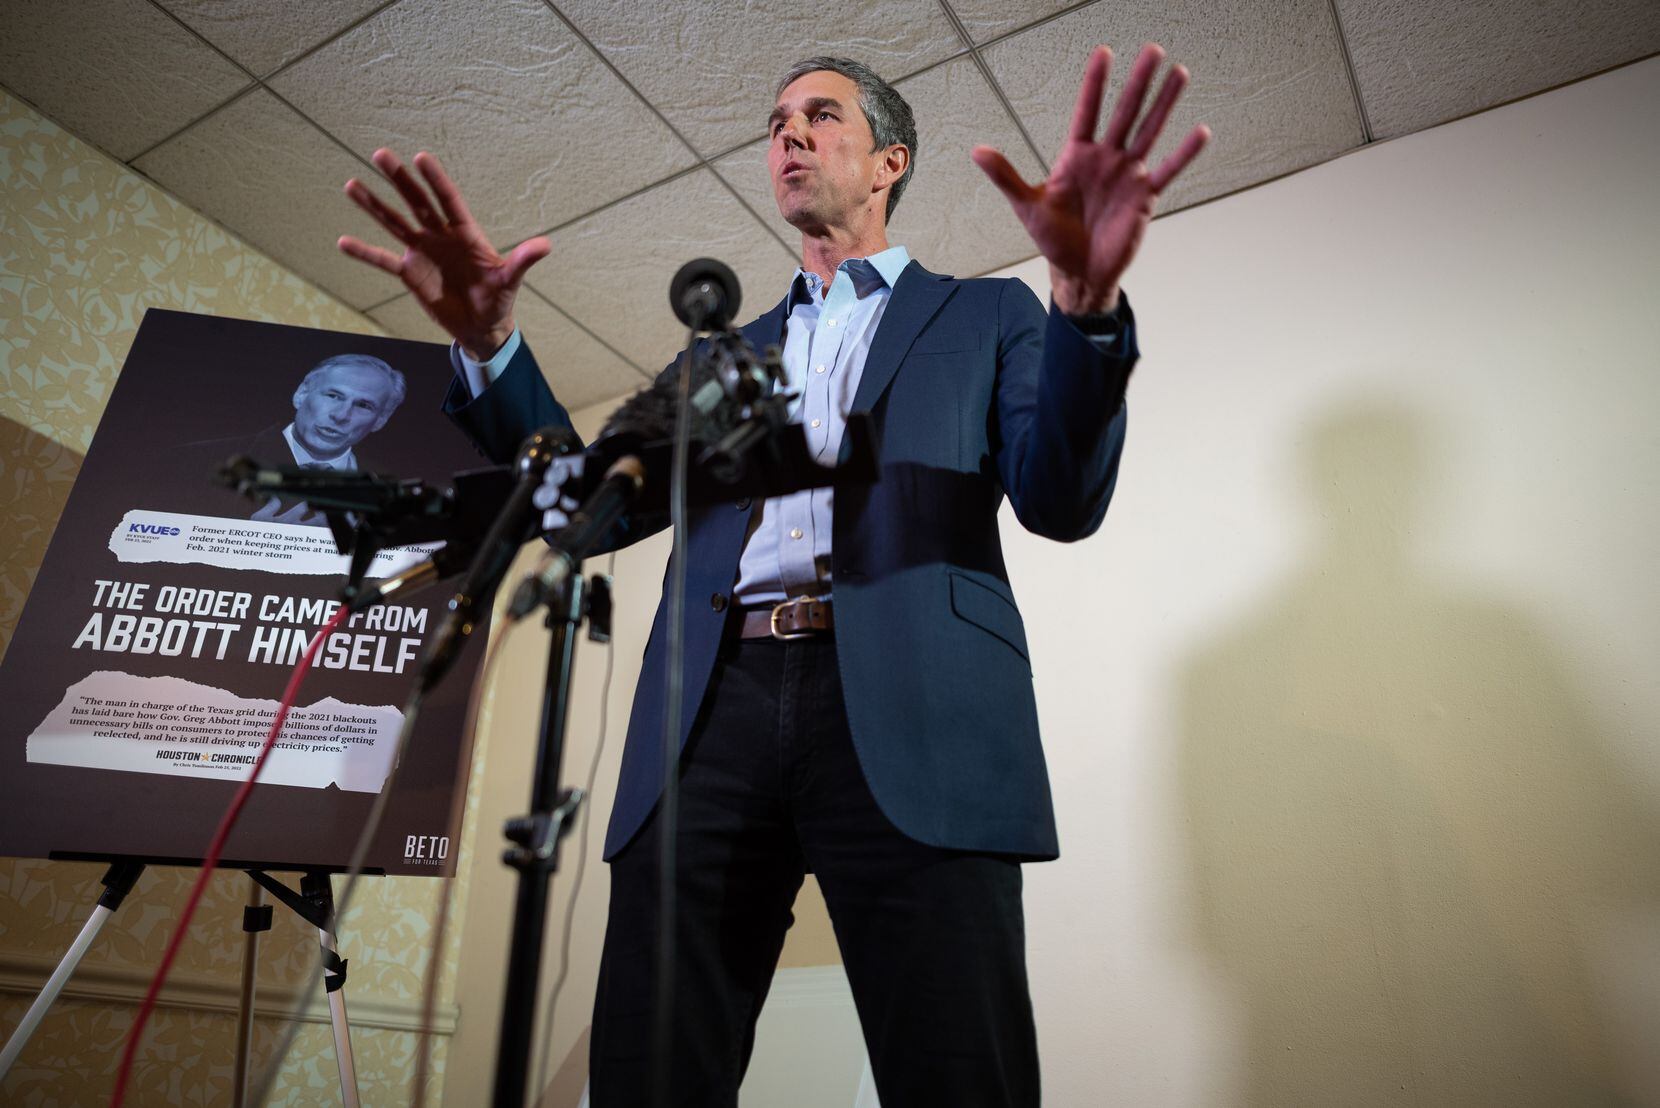 Beto O'Rourke, democratic candidate for Governor, stands next to an image of Texas Governor...